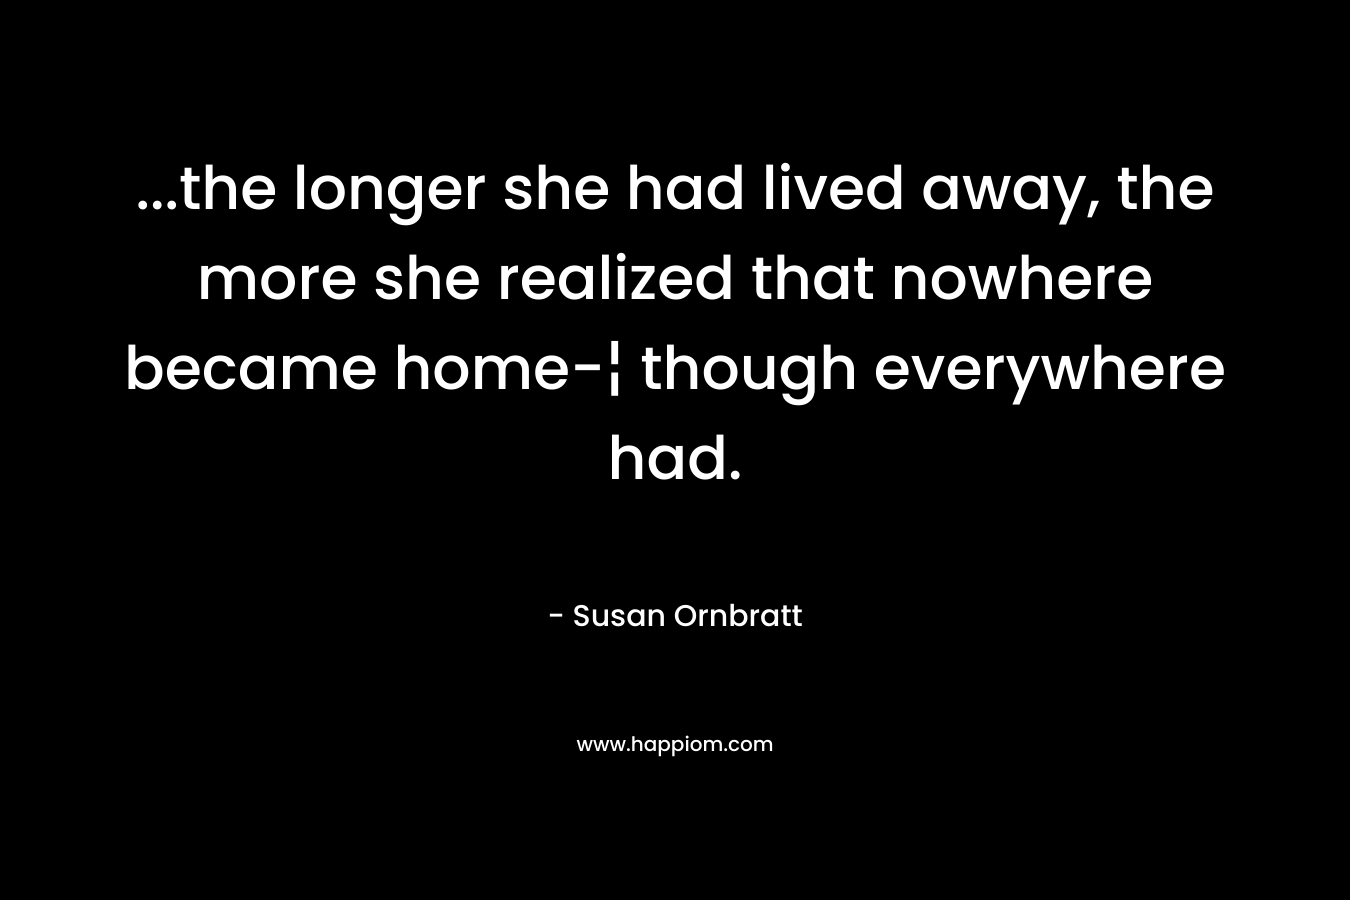 ...the longer she had lived away, the more she realized that nowhere became home-¦ though everywhere had.